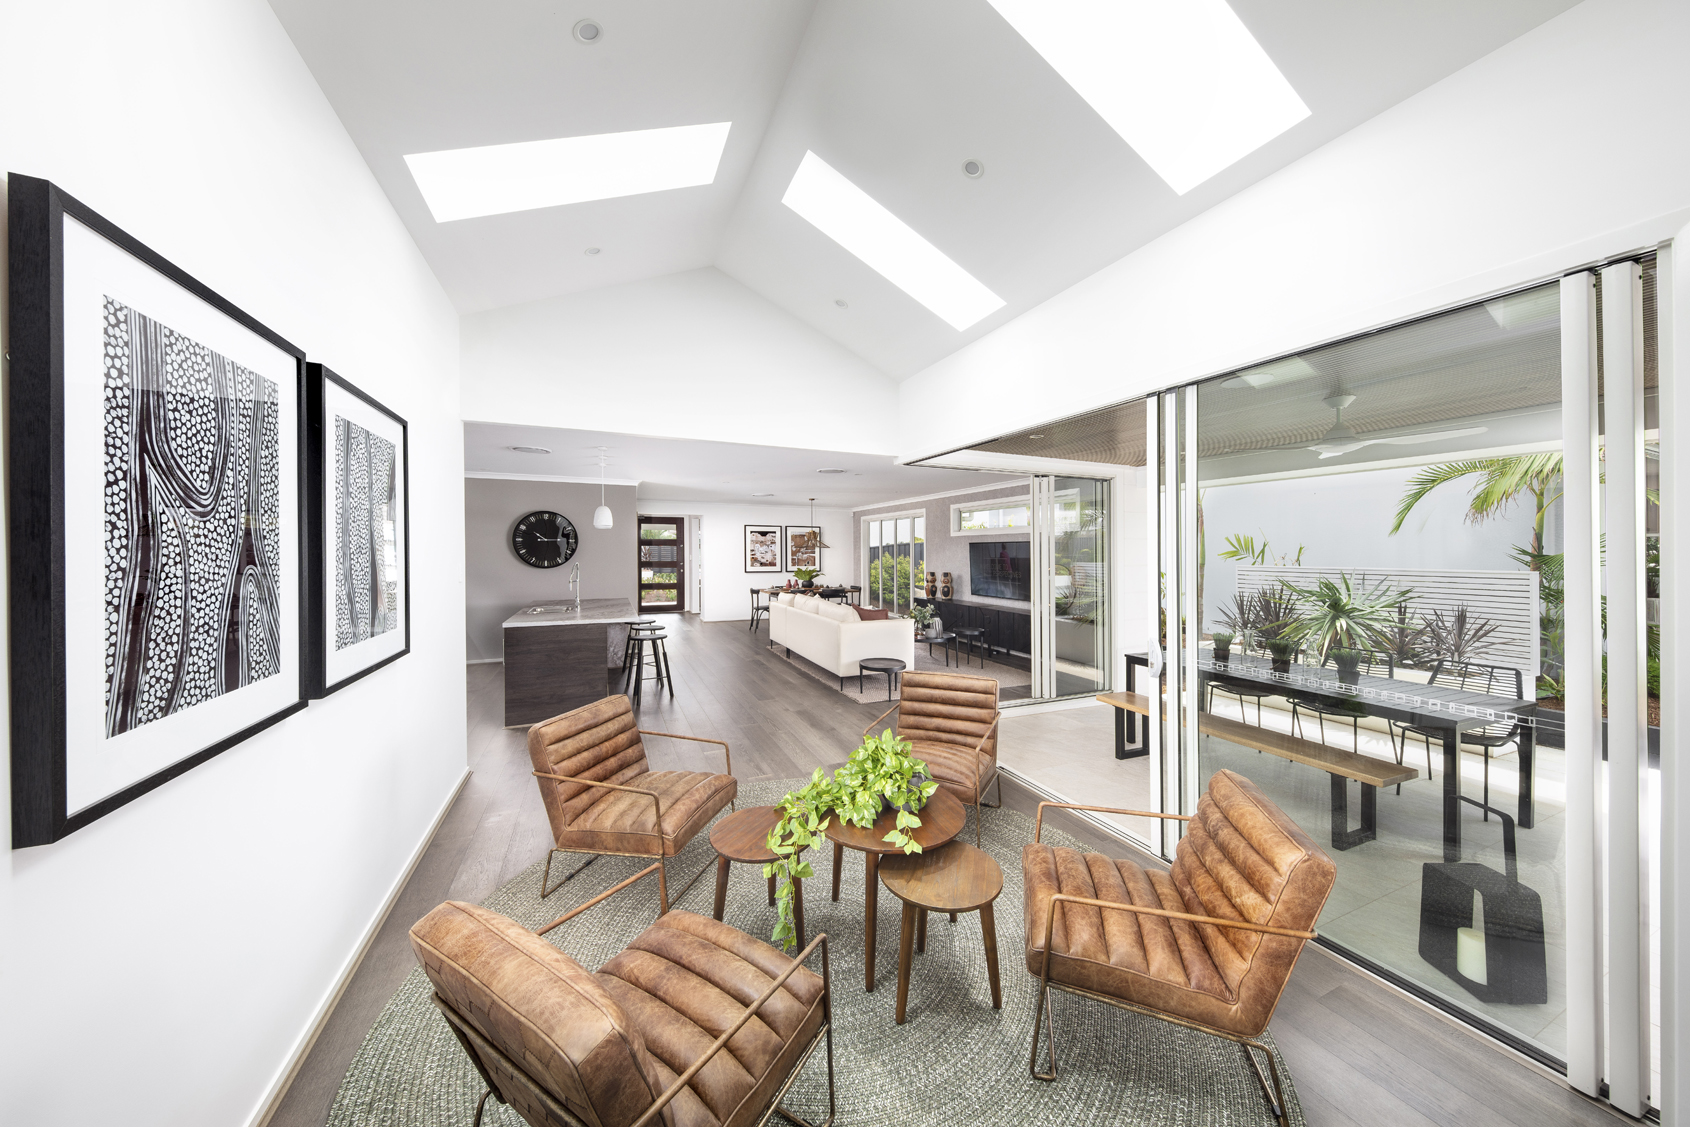 Maximise natural light in your dream home